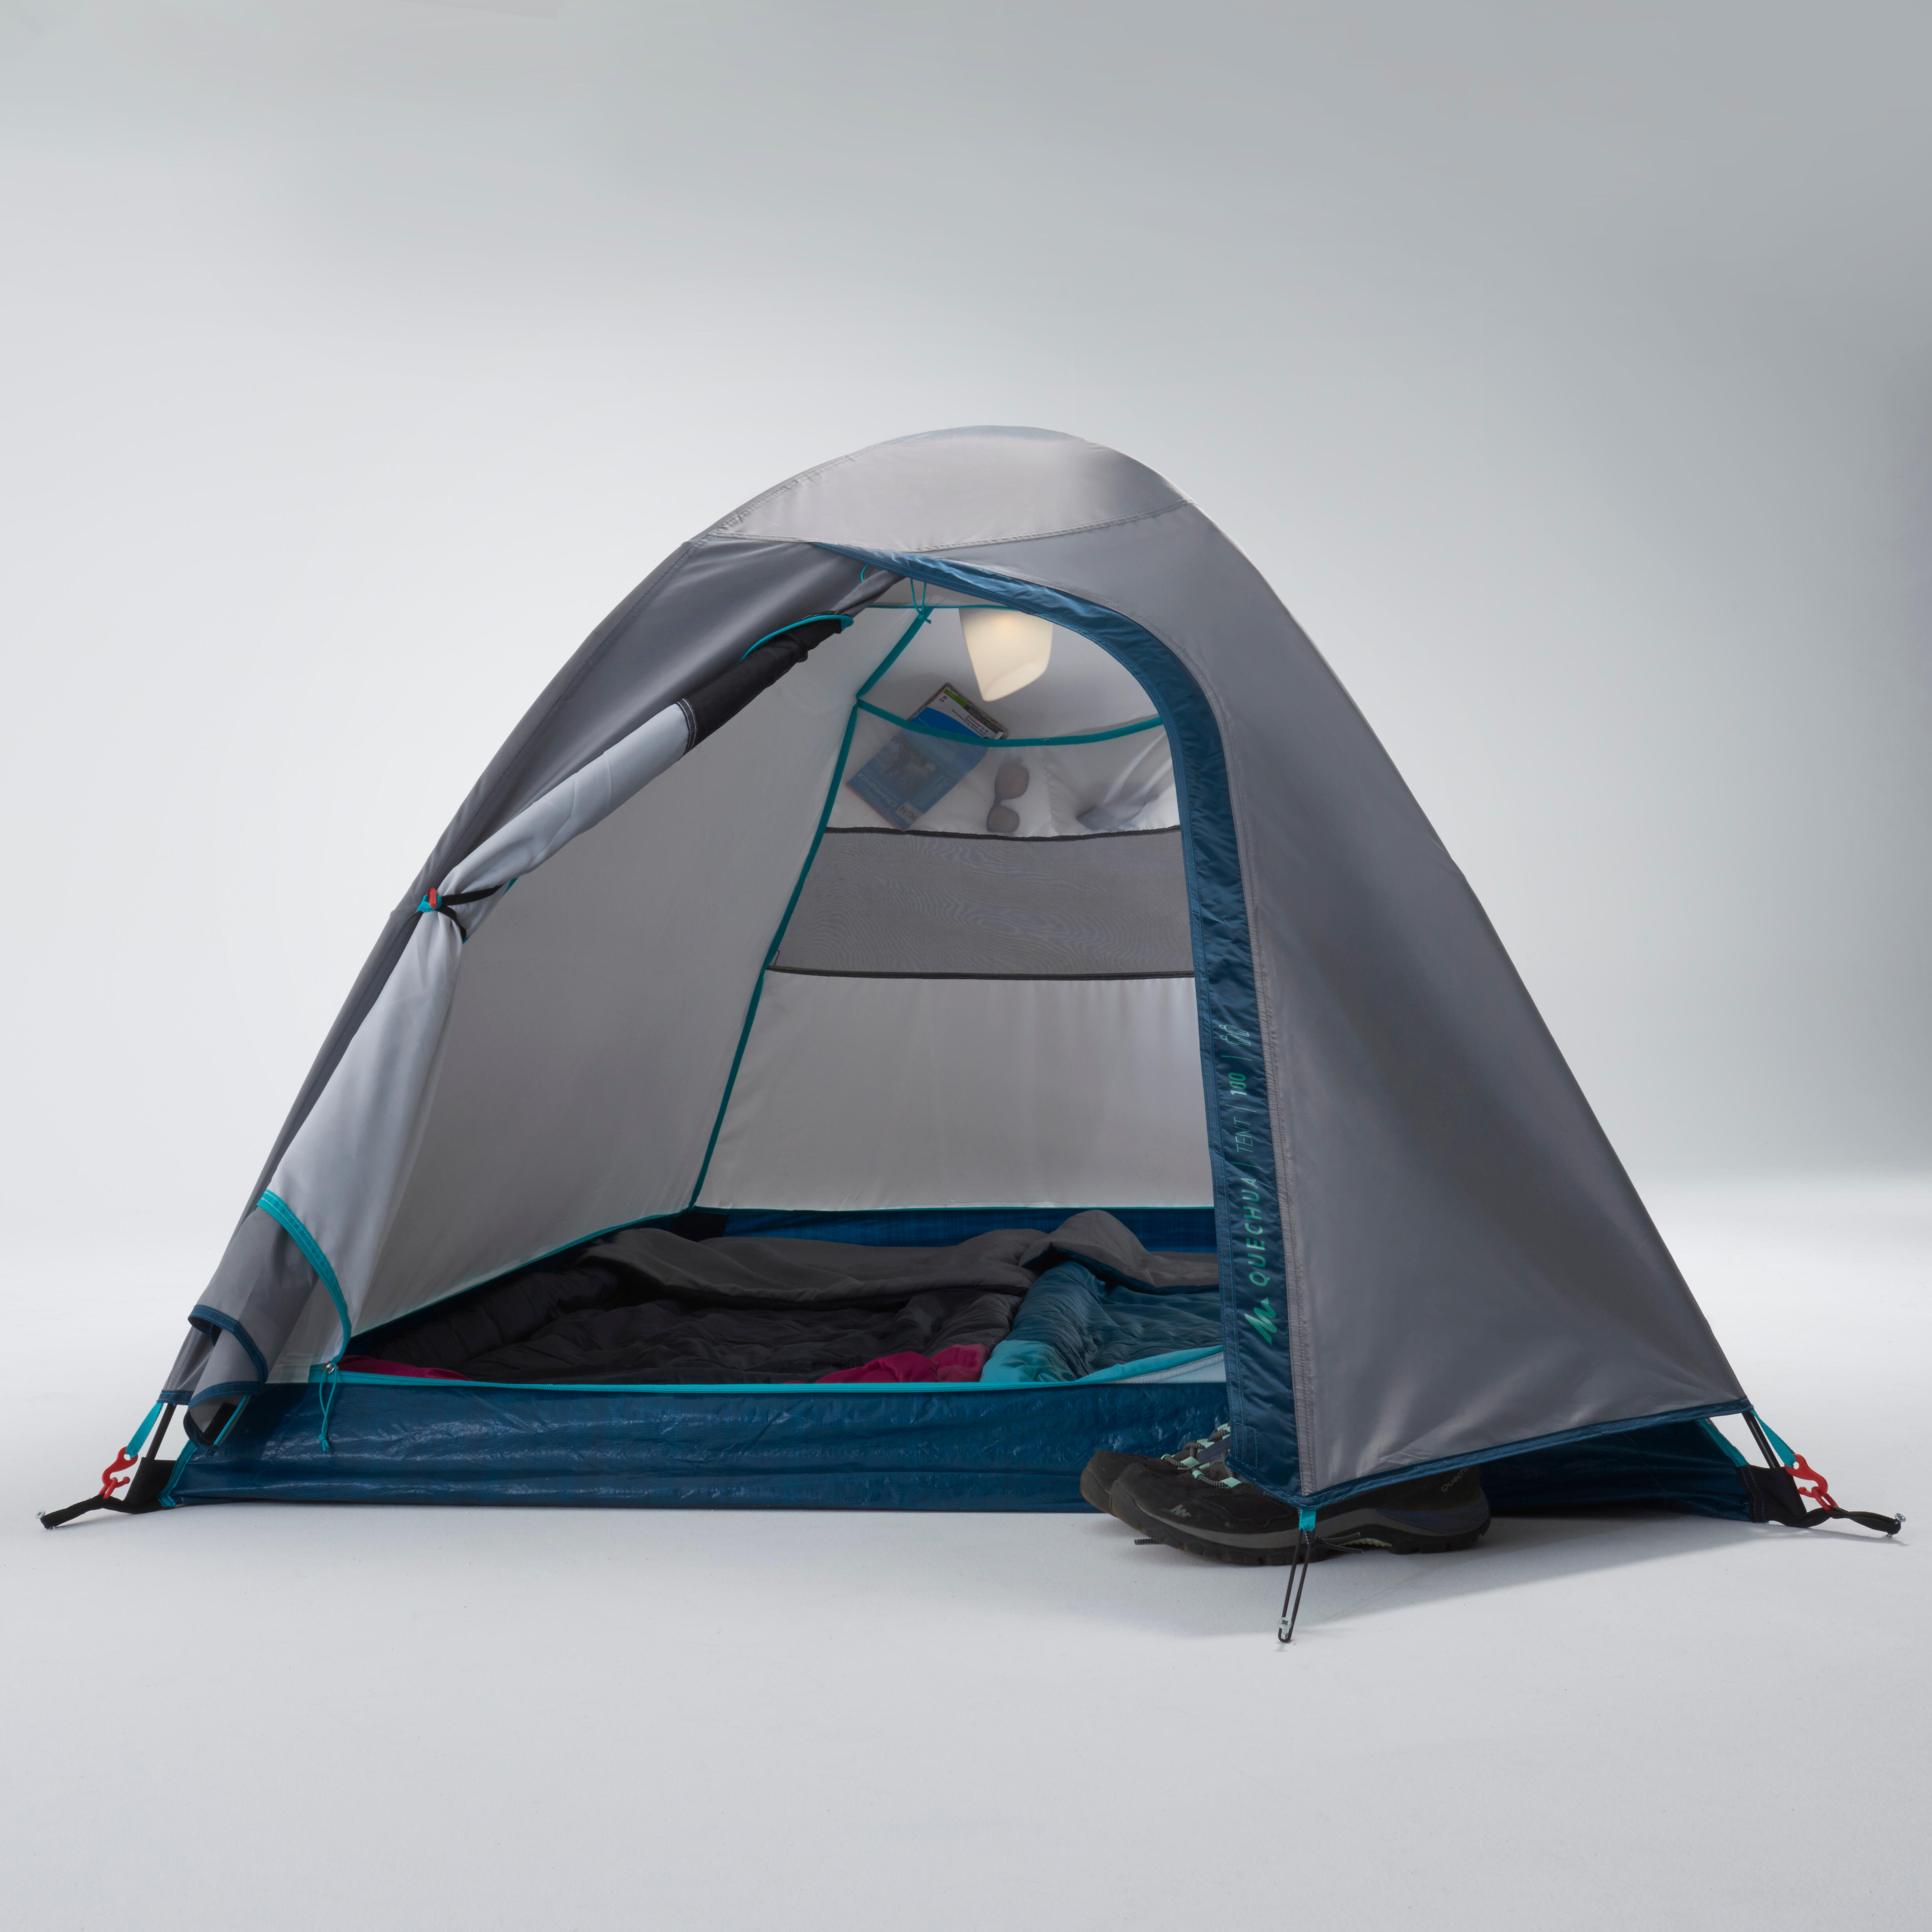 CAMPING TENT MH100 - 2 PERSON - Decathlon